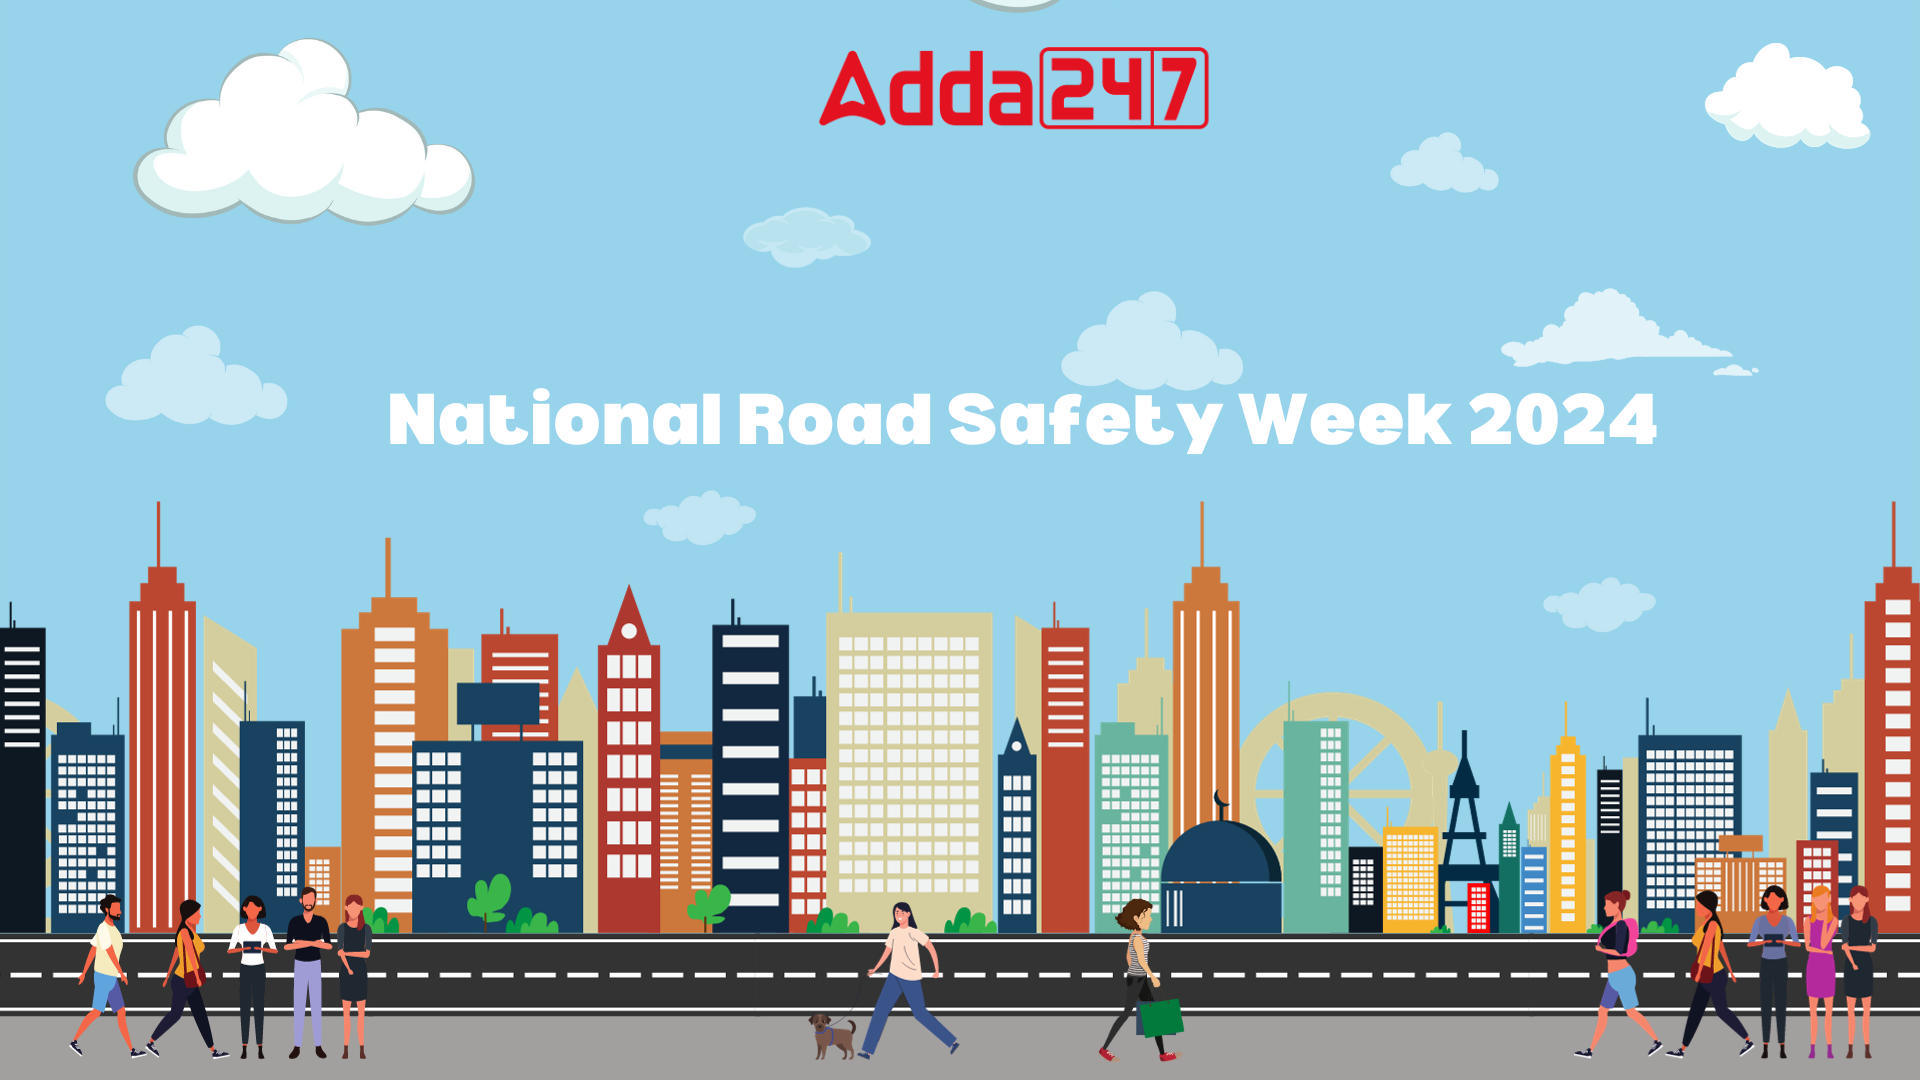 National Road Safety Week is Observed Annually From January 11 to 17